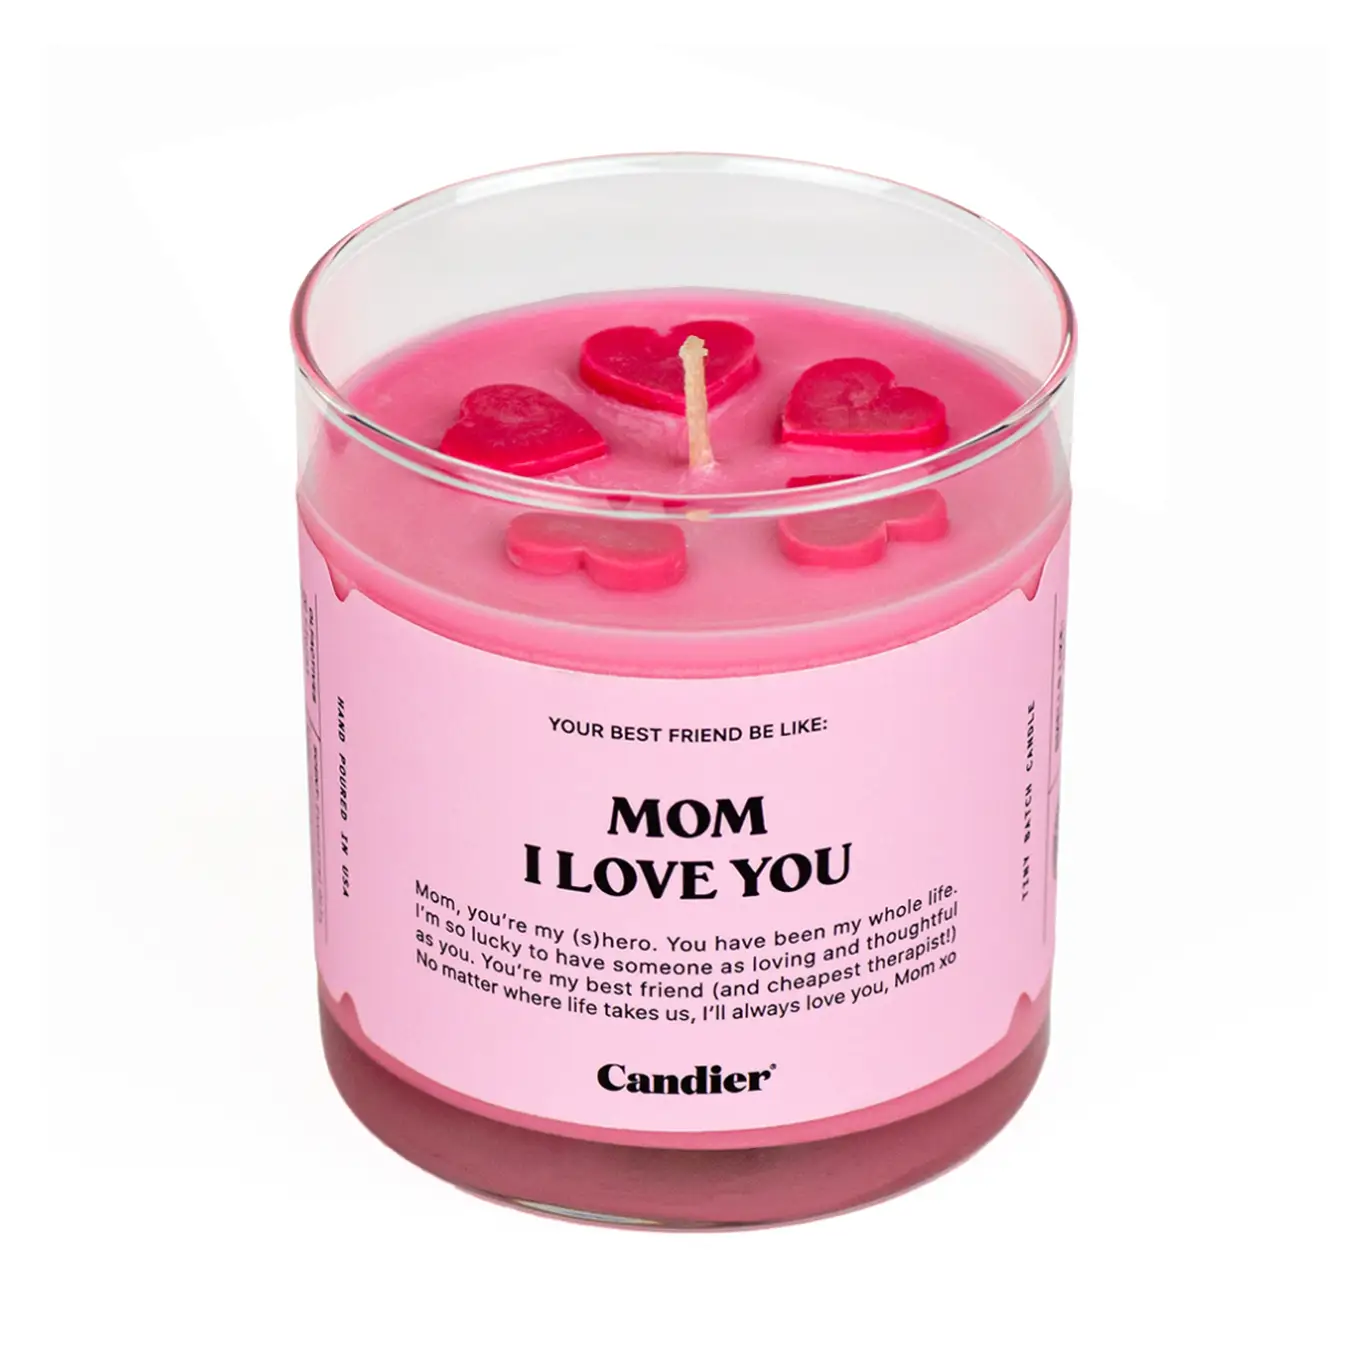 Mom I Love You Candier Candle